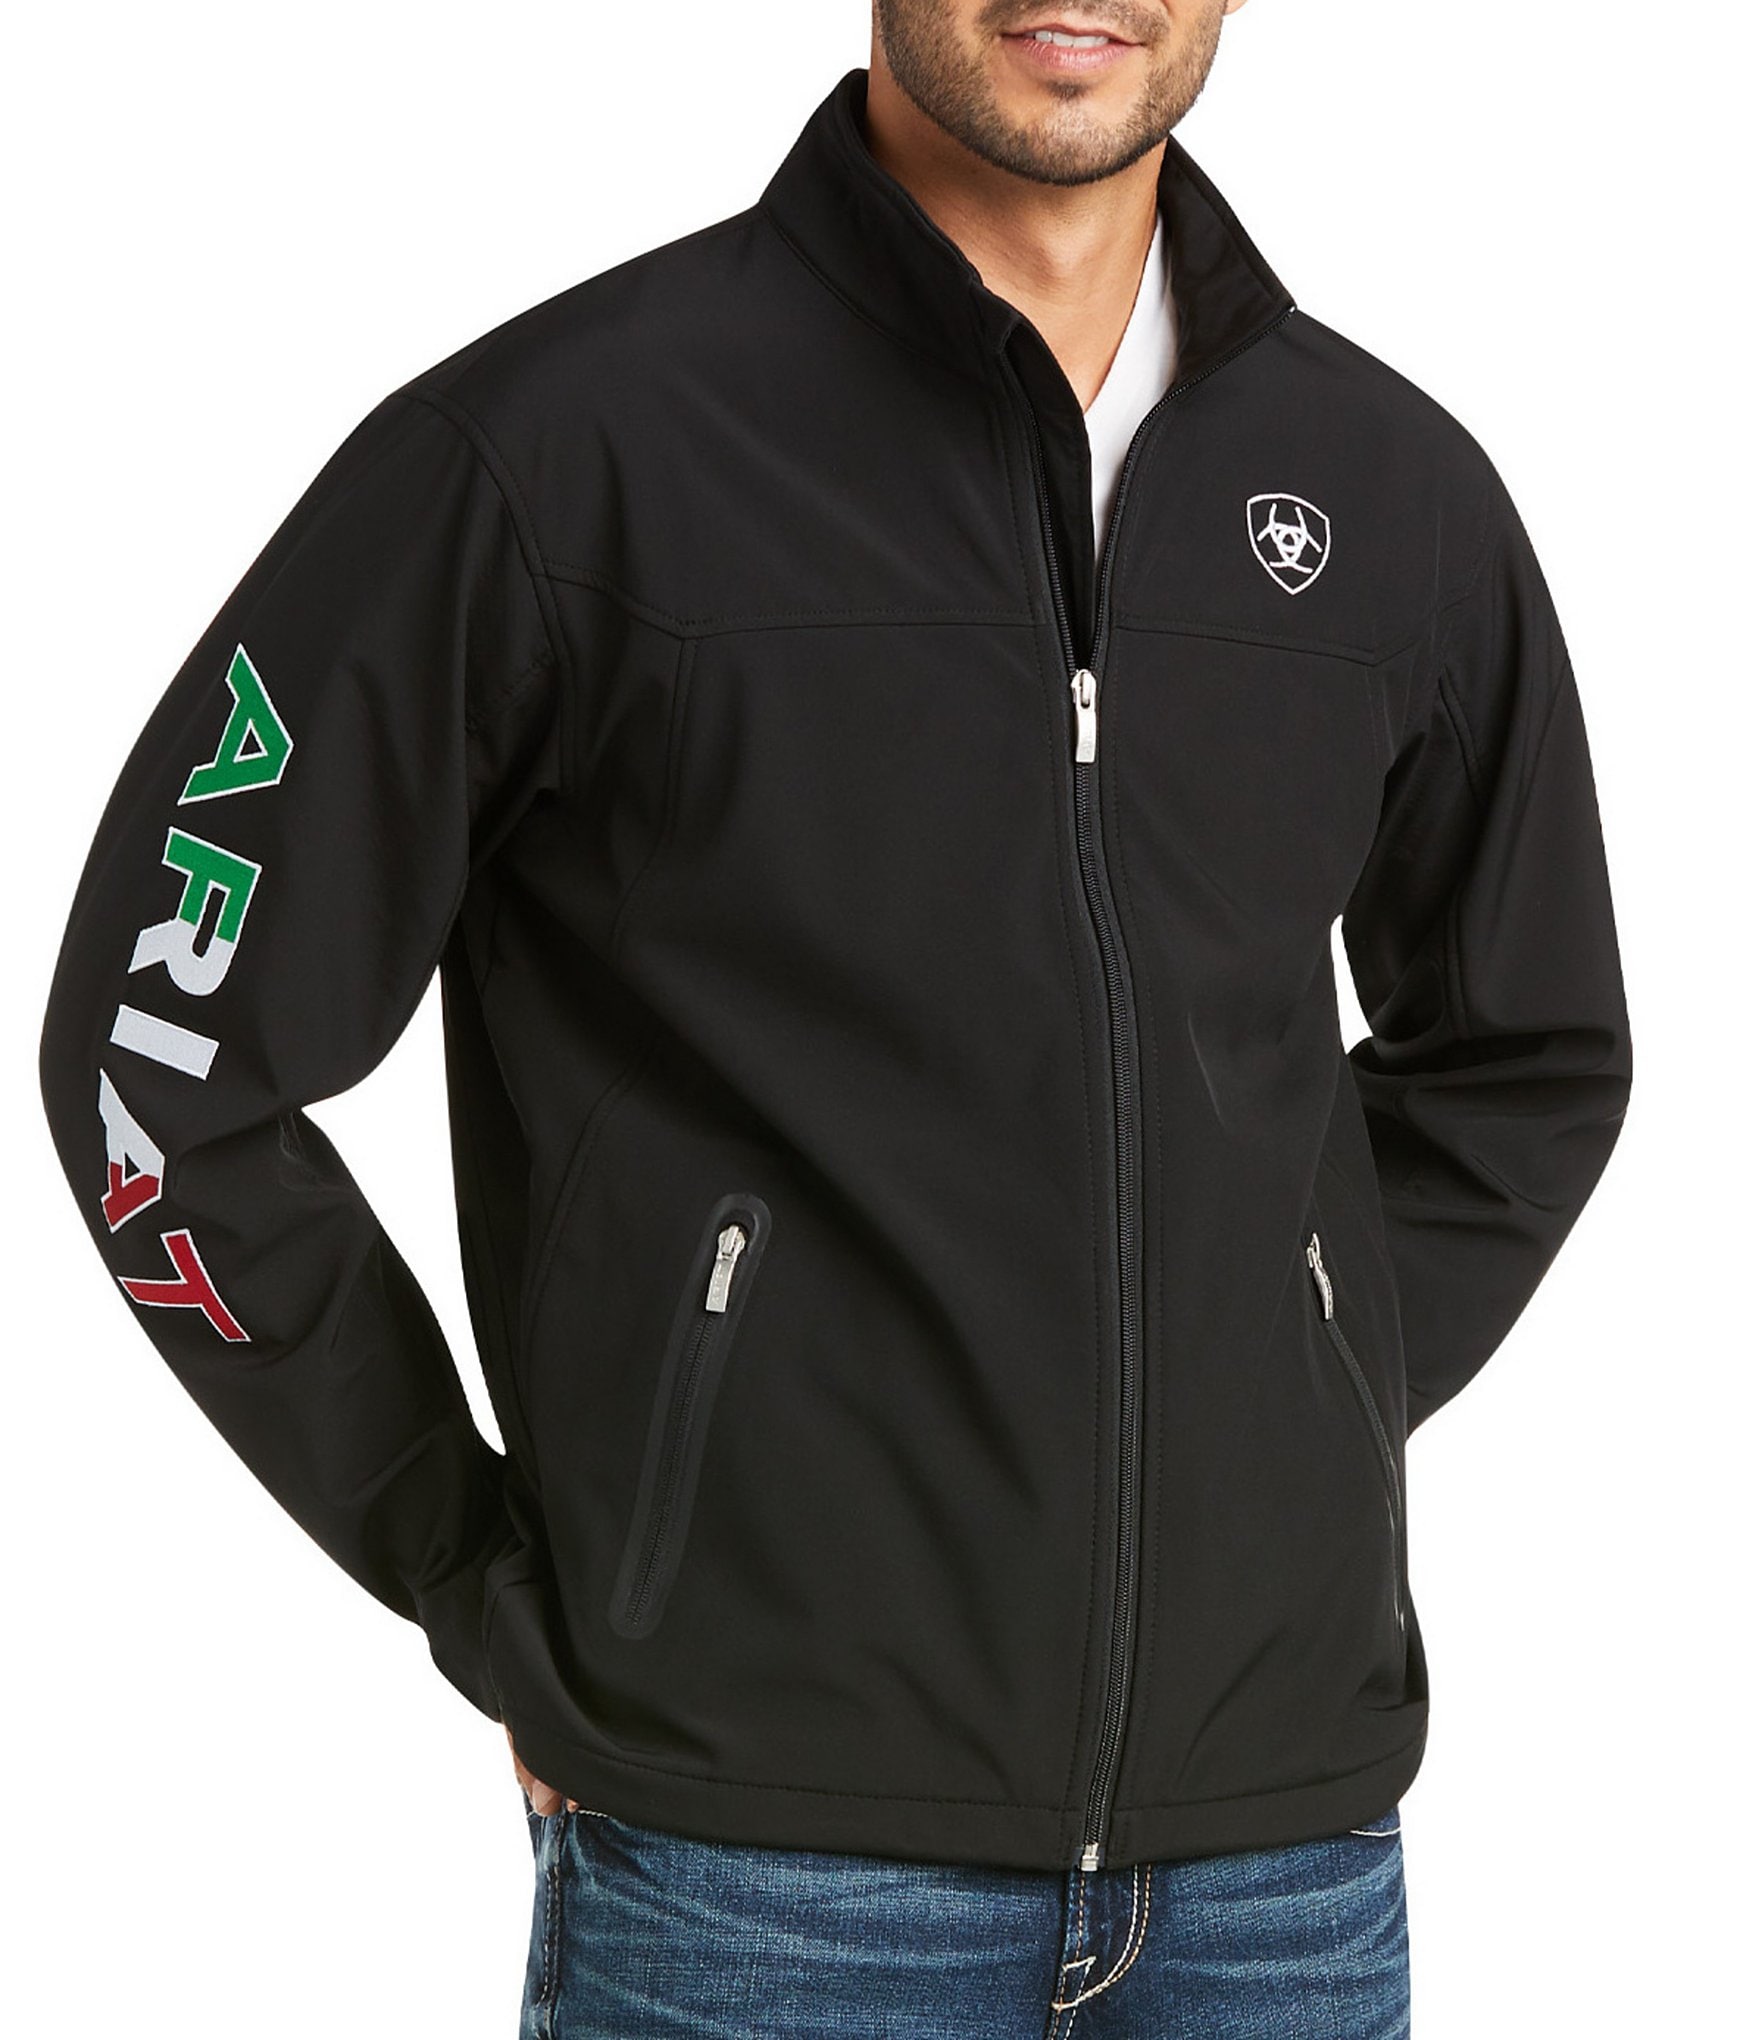 Best Price on New Ariat Team Jacket - Red, White, and Blue